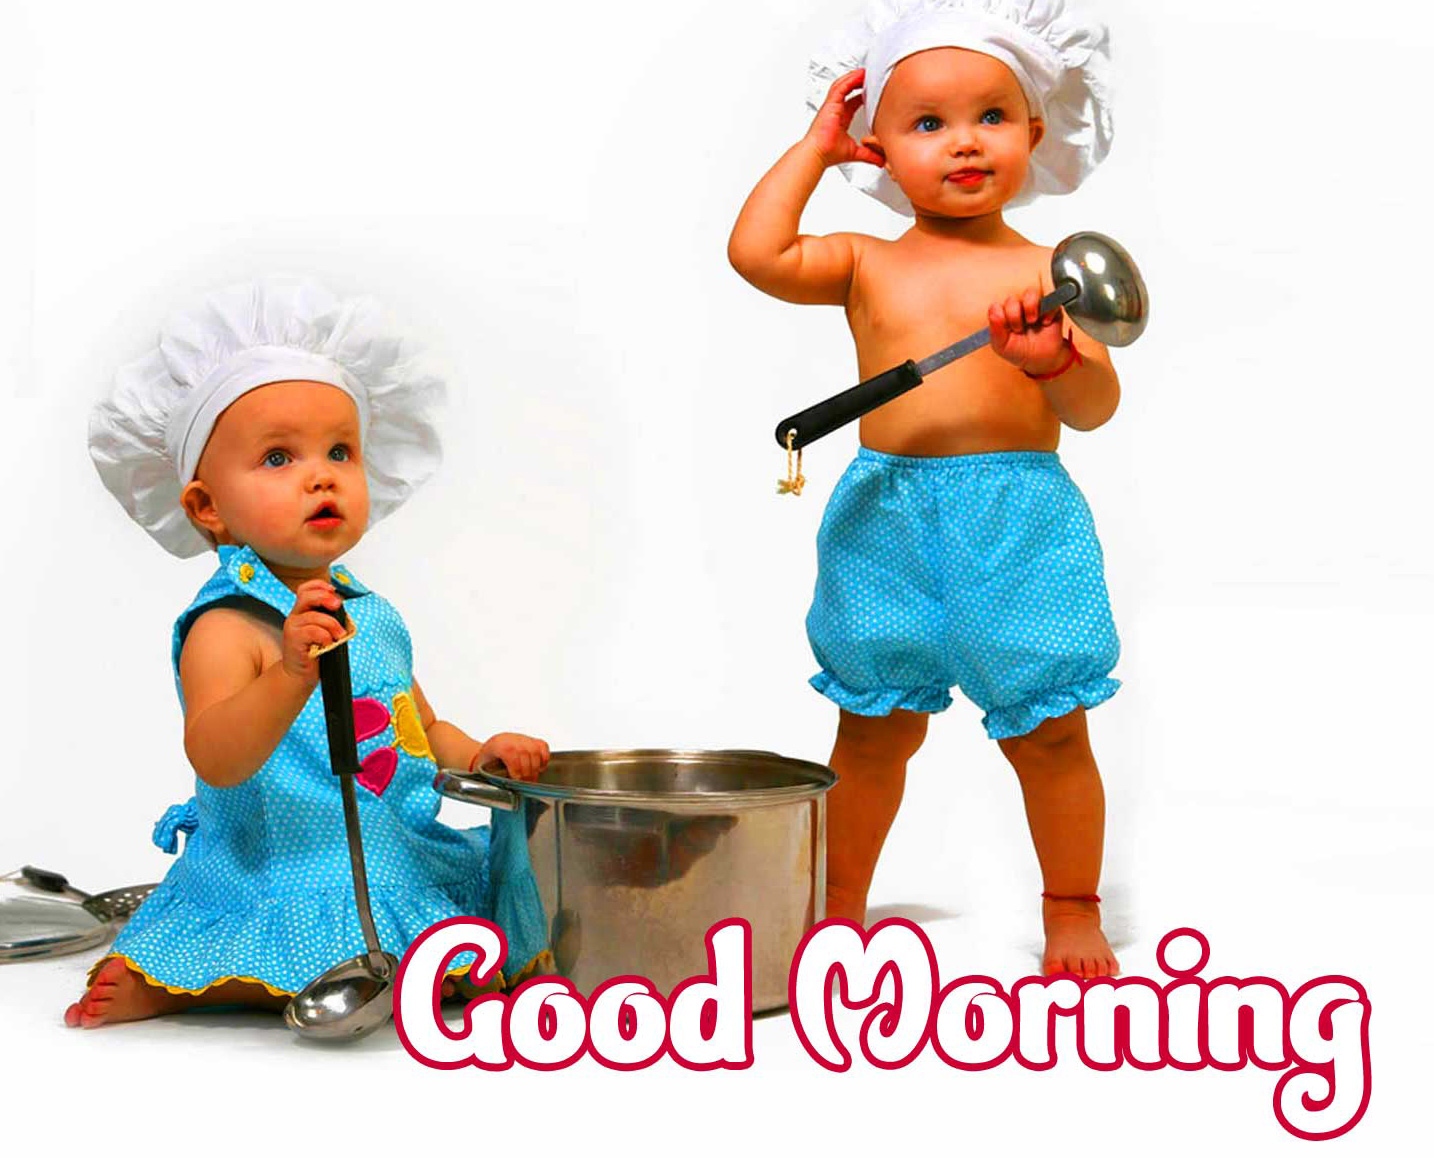 Good Morning Small Baby Images Pics Free Download 